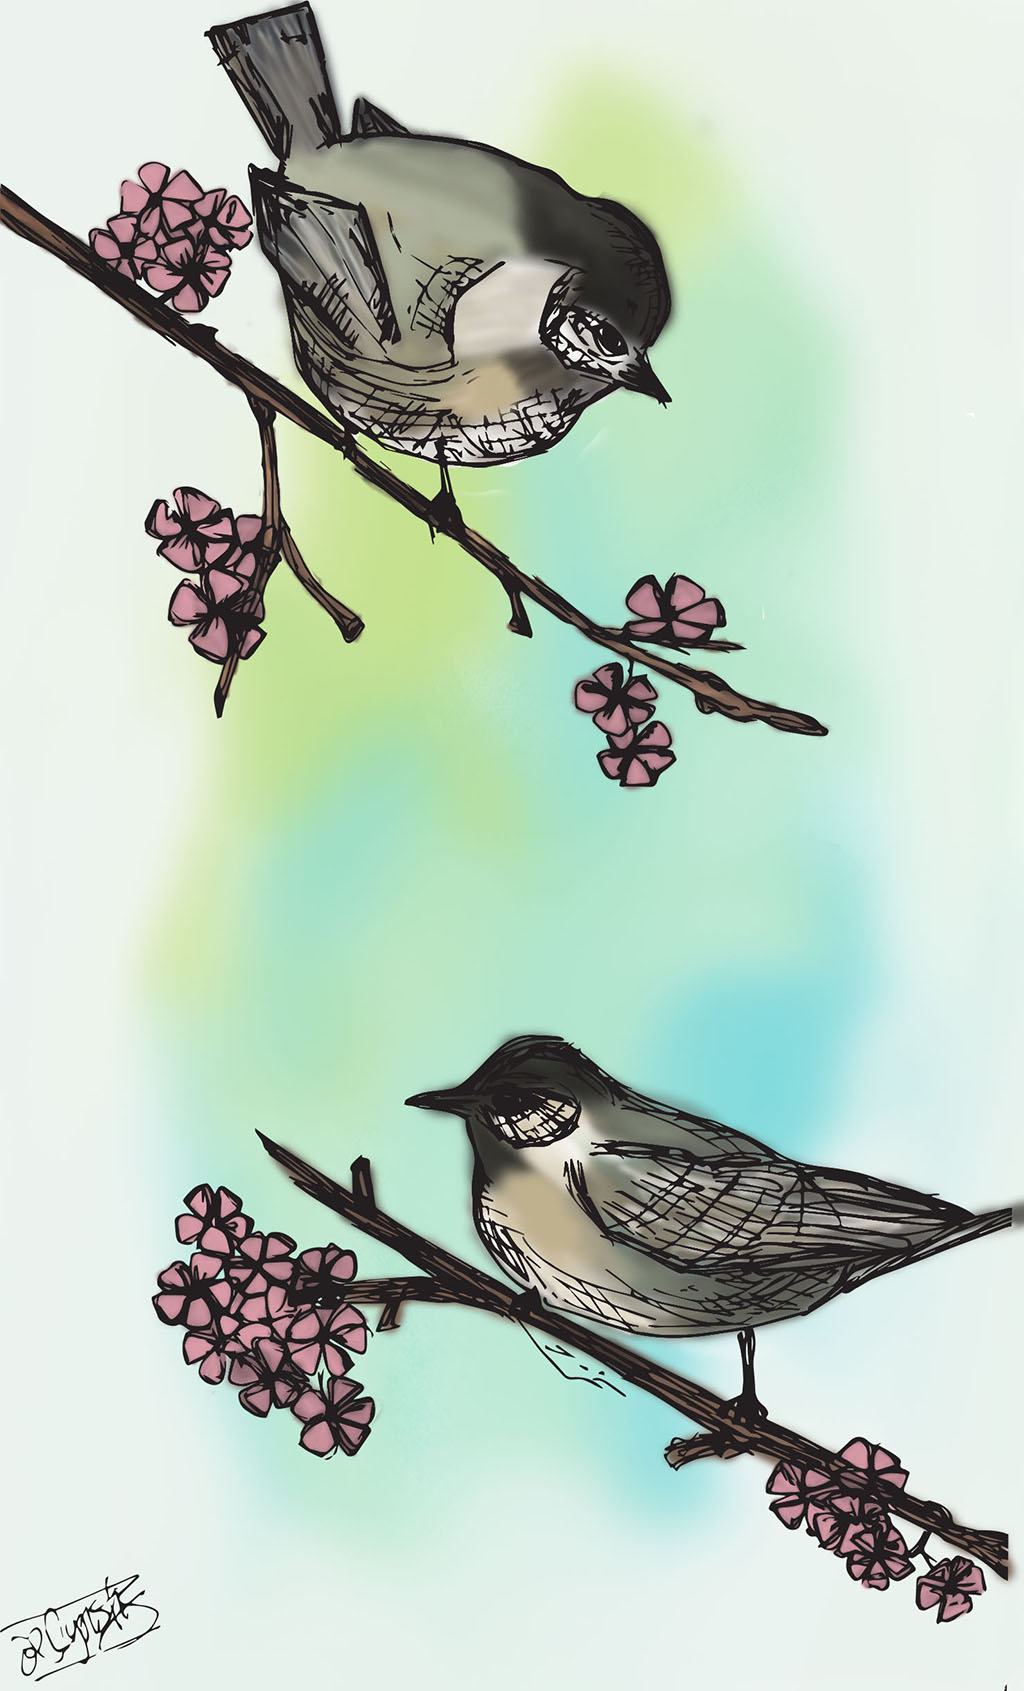 Illustration of Two Birds on Branches